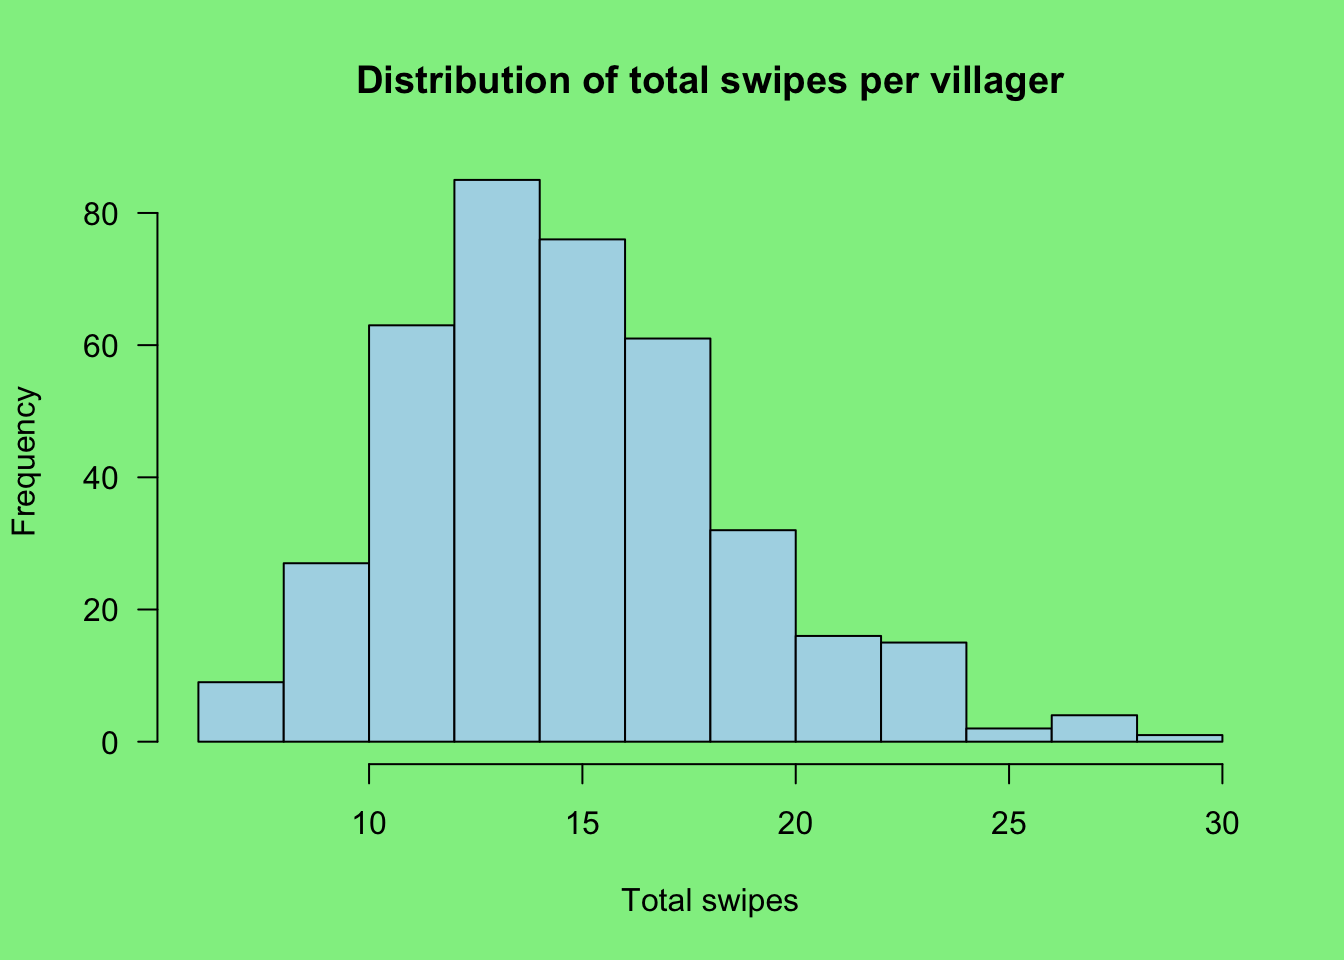 Histogram of total swipes per villager. It's roughly normally distributed between 5 and 10 swipes, but slightly left-skewed with a tail going beyond 15 swipes.